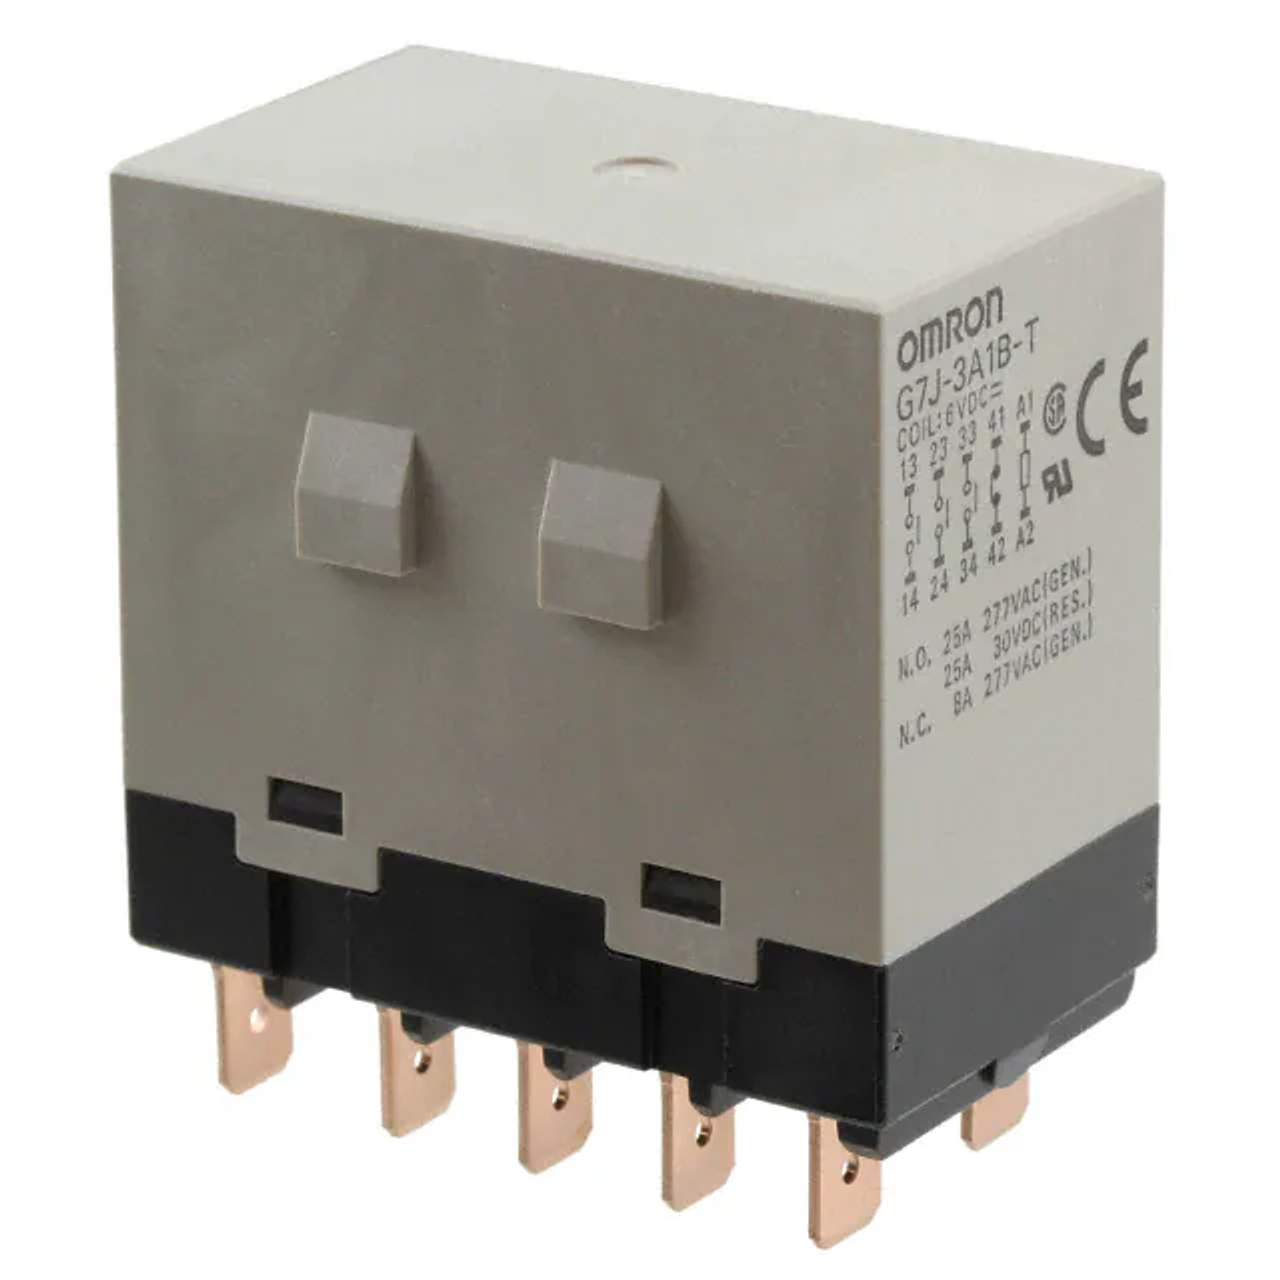 Omron G7J-3A1B-T AC24 Power Relays